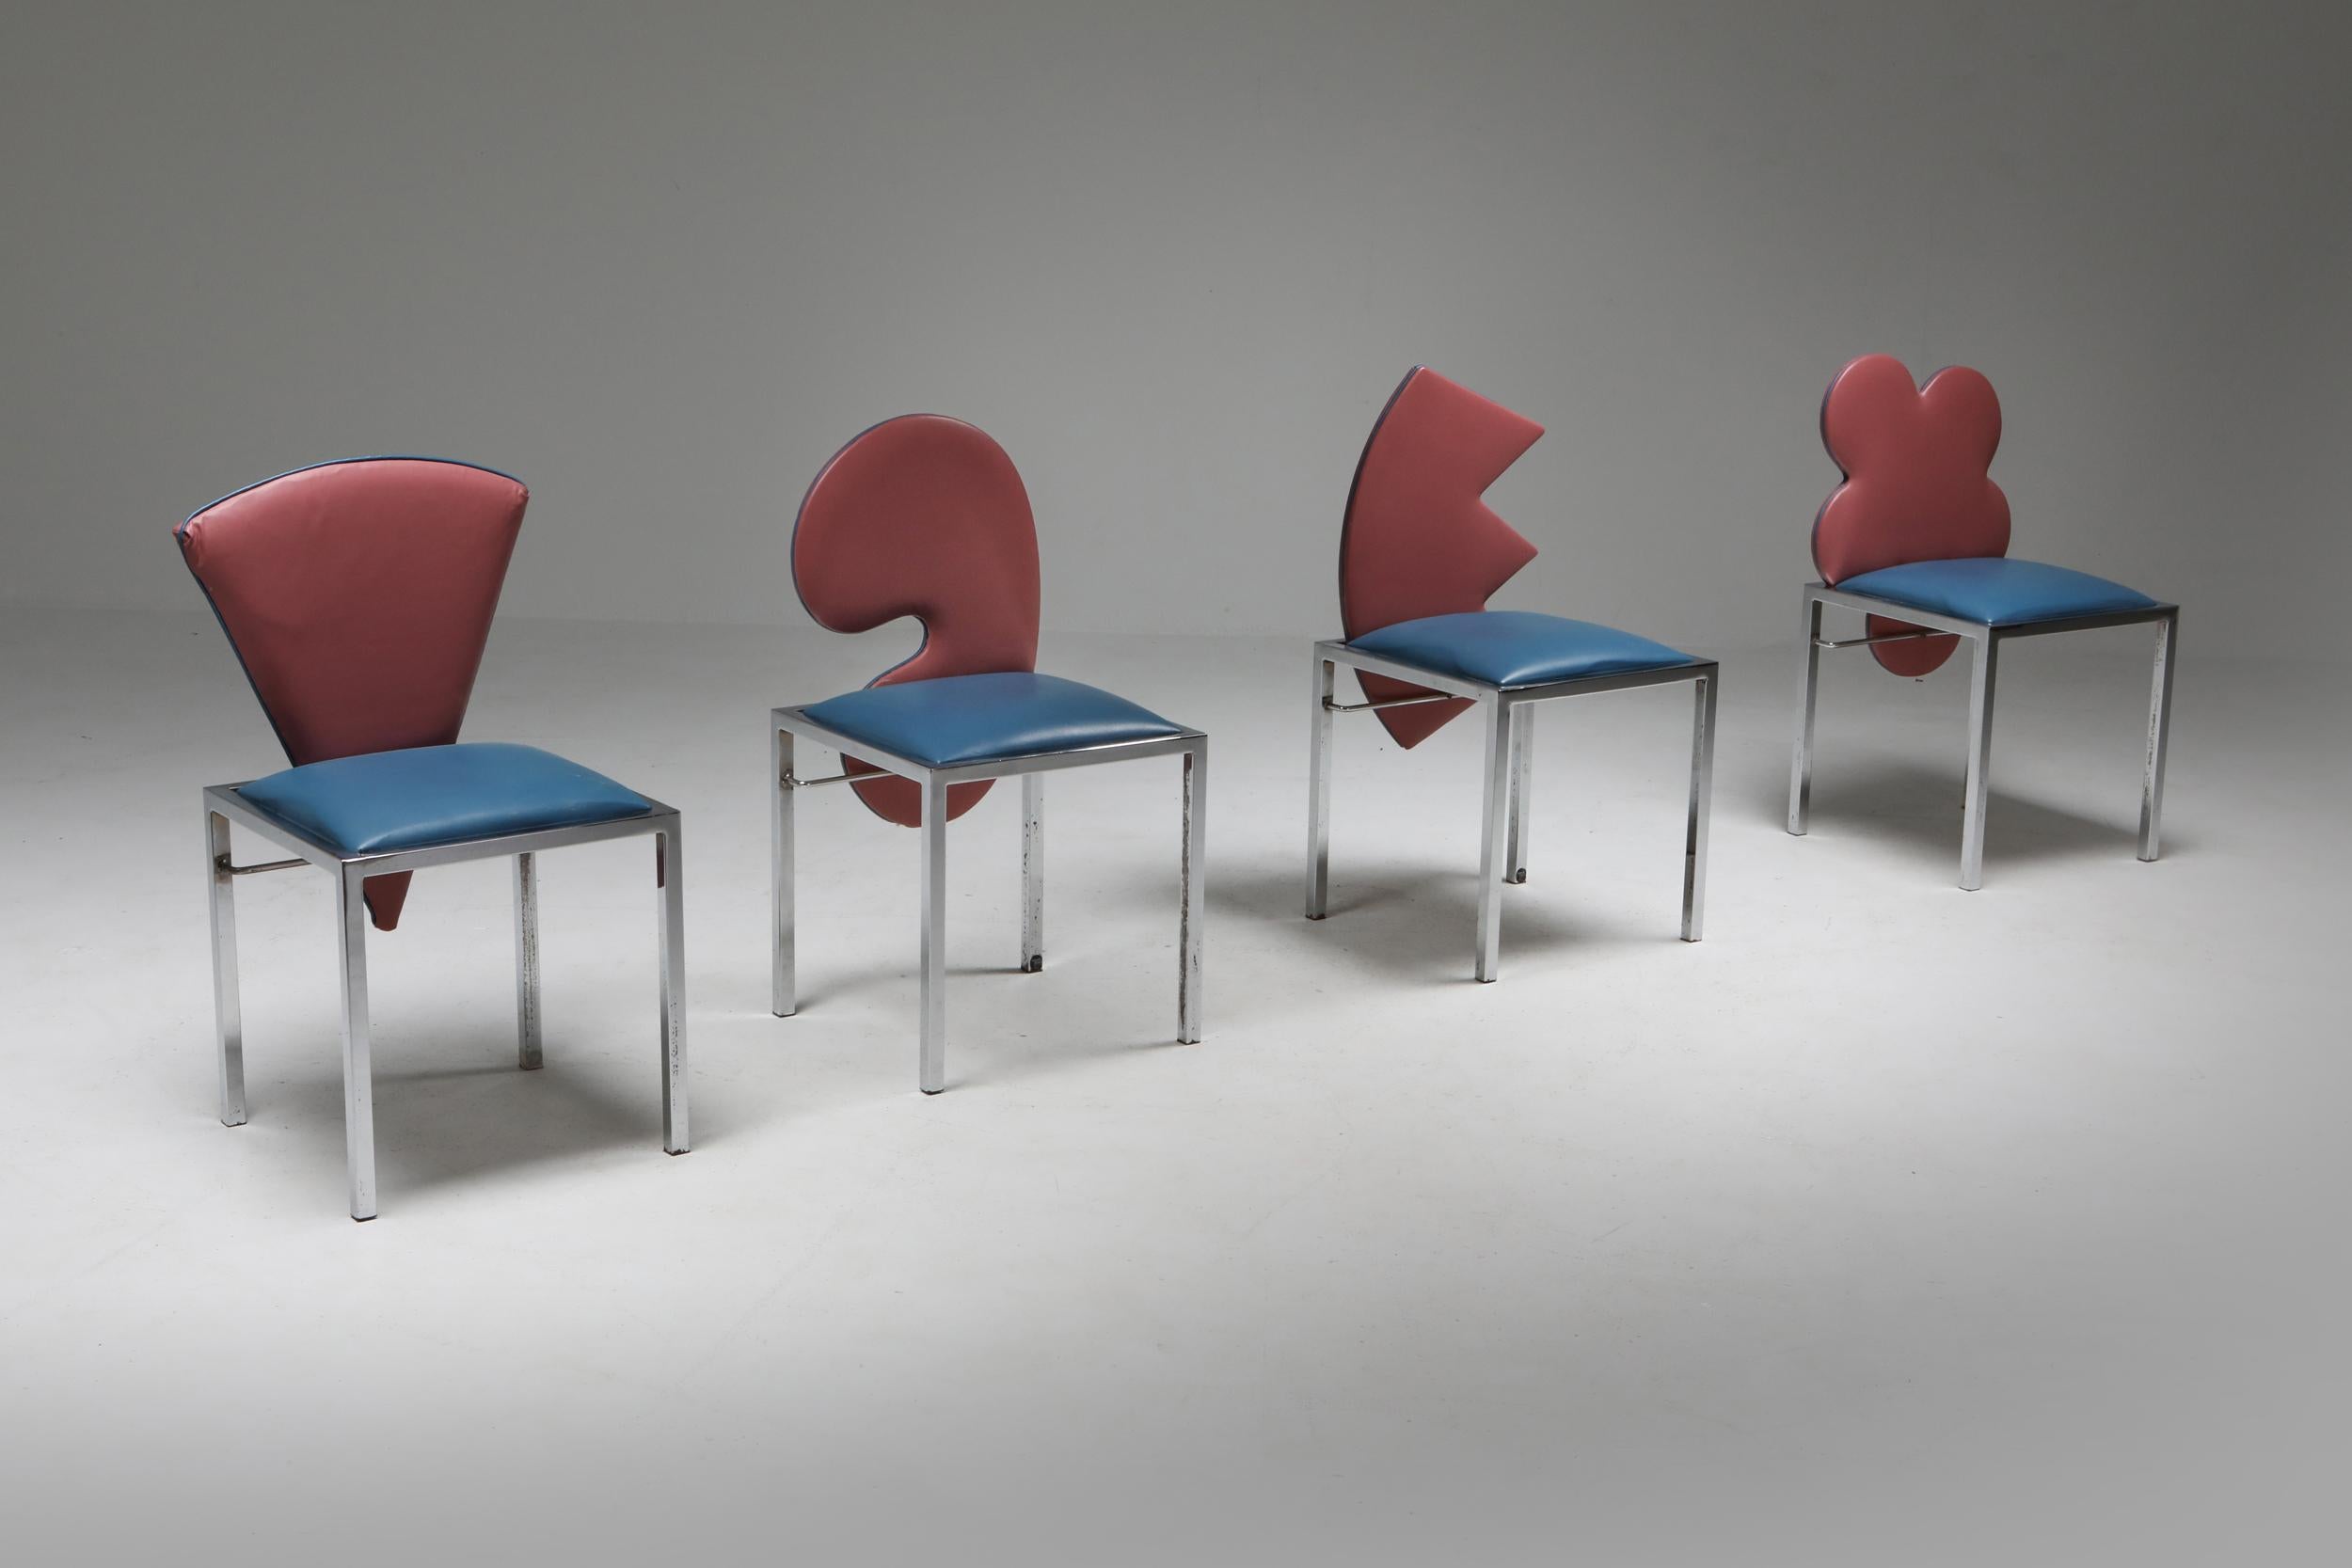 Post-modern Italian chairs, Saporiti, Omaggi, Design Salvati e Tresoldi, 1980s

An “homage” to the works of some the masters of contemporary art: Warhol, Fontana, Malevich, Kandinsky, Balla, Lisitsky. The six models of this collection share the